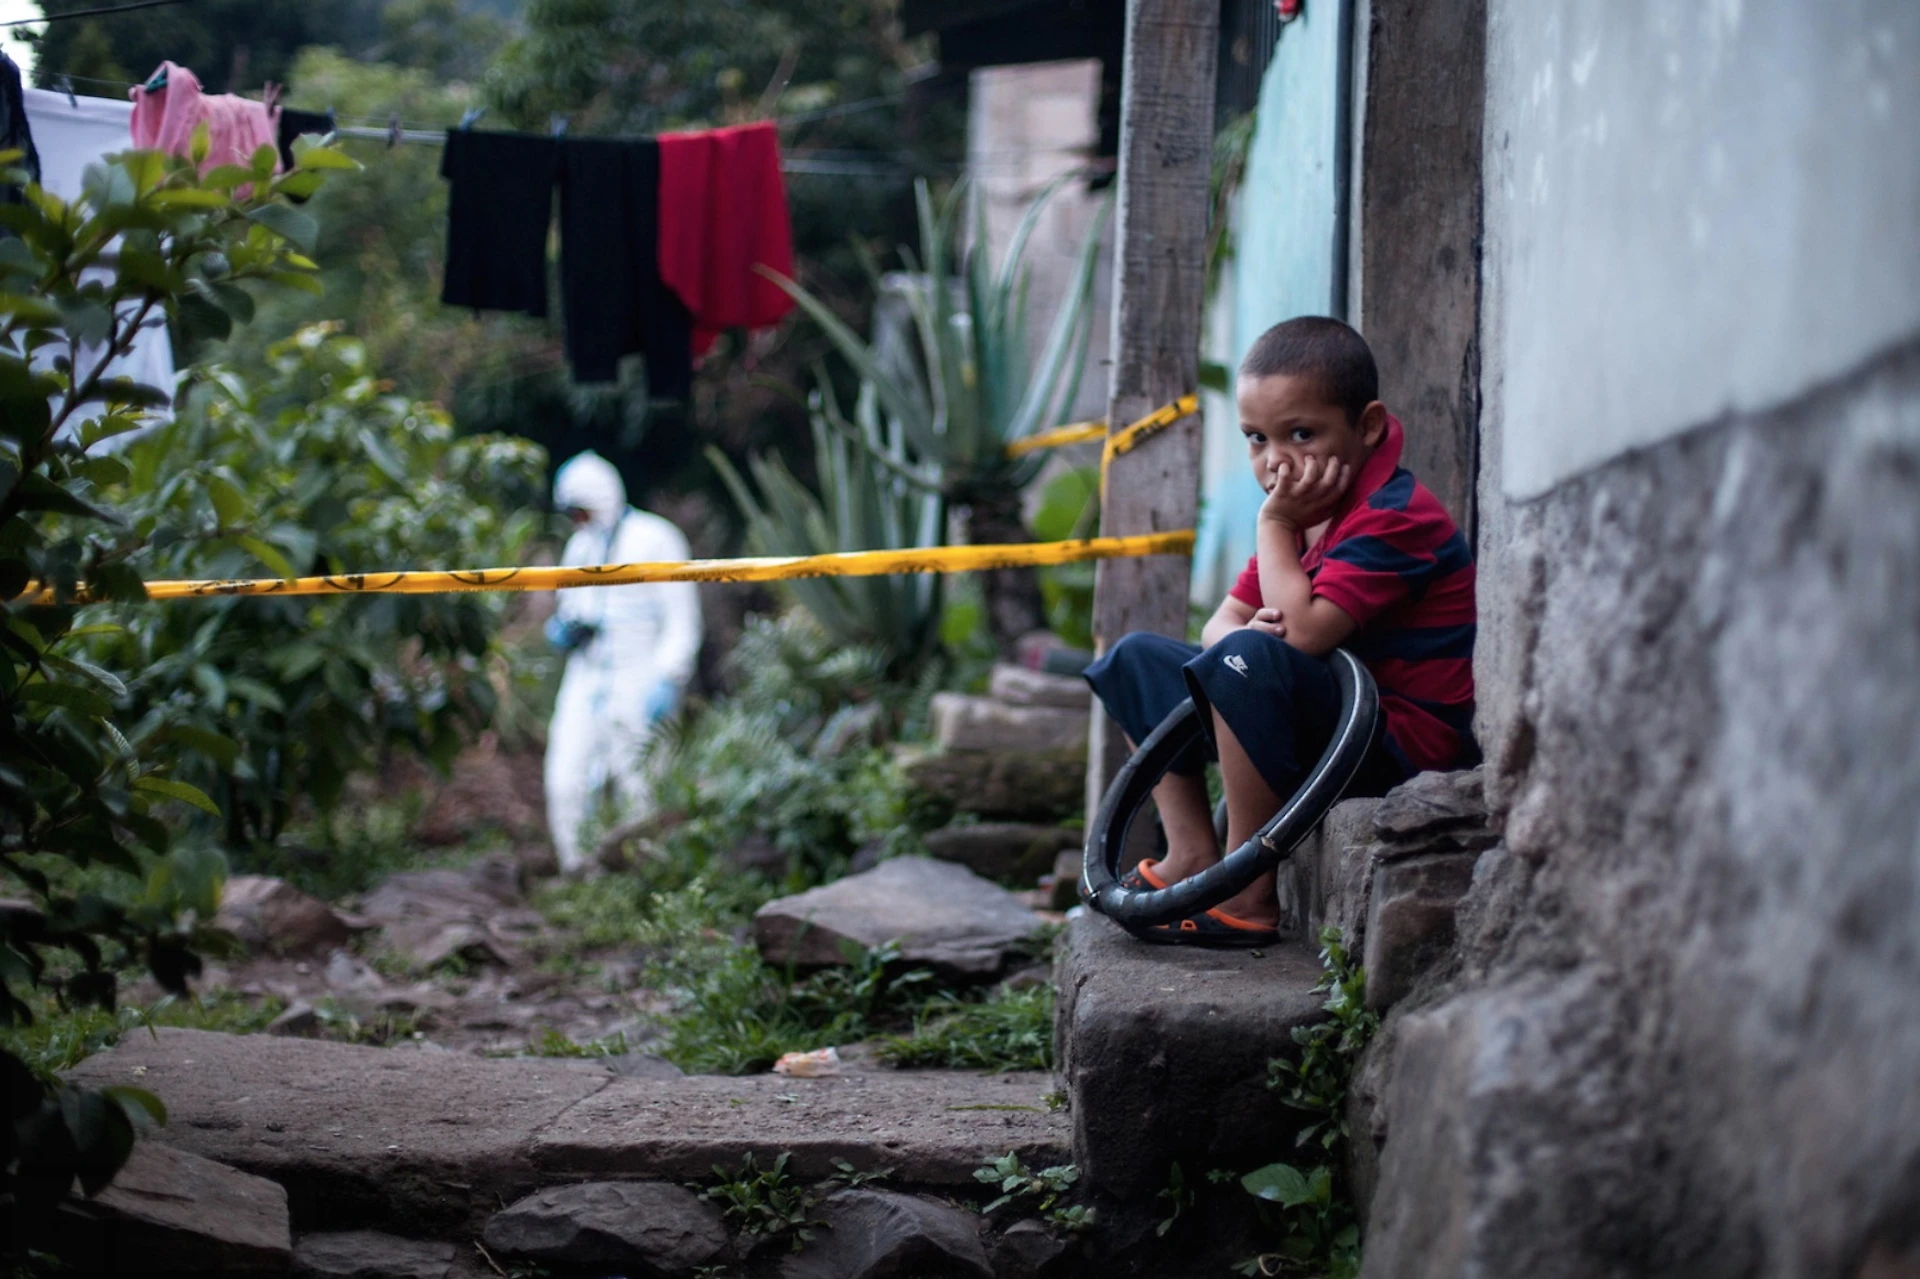 The Travel Diary: Confronting the shocking violence of Honduras